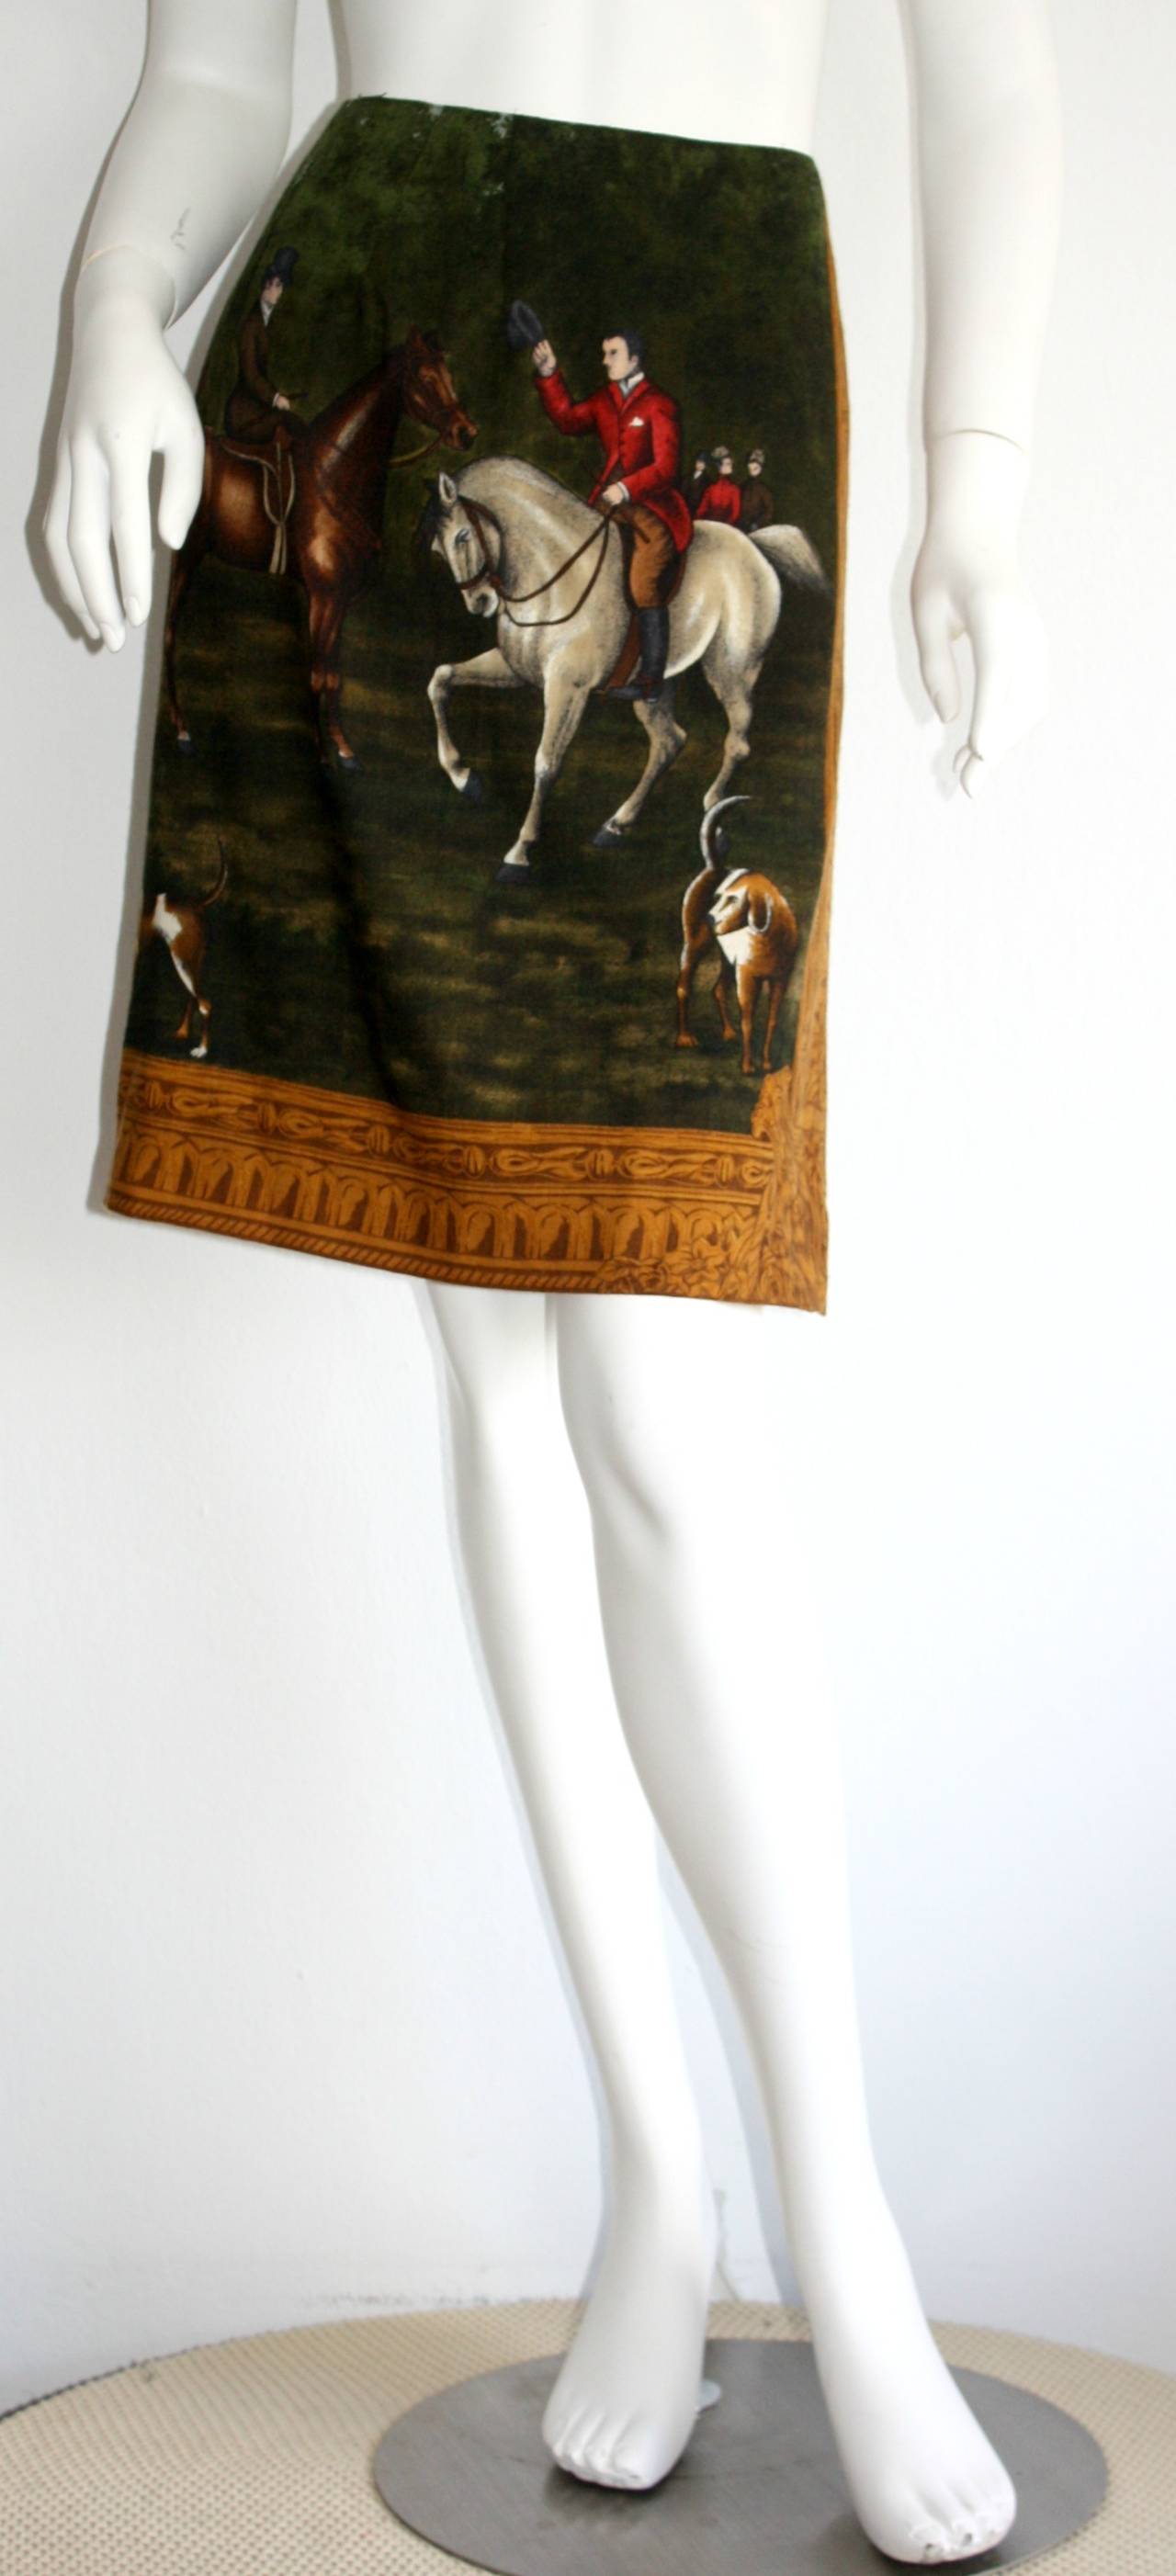 Incredible vintage Ralph Lauren 'Blue Label' wrap skirt! Features antique print of huntsmen, with dogs--Such a great print! Impressive amount of detail on print, and in construction. Features three interior hooks. 80% wool, 20% nylon. Fully lined.